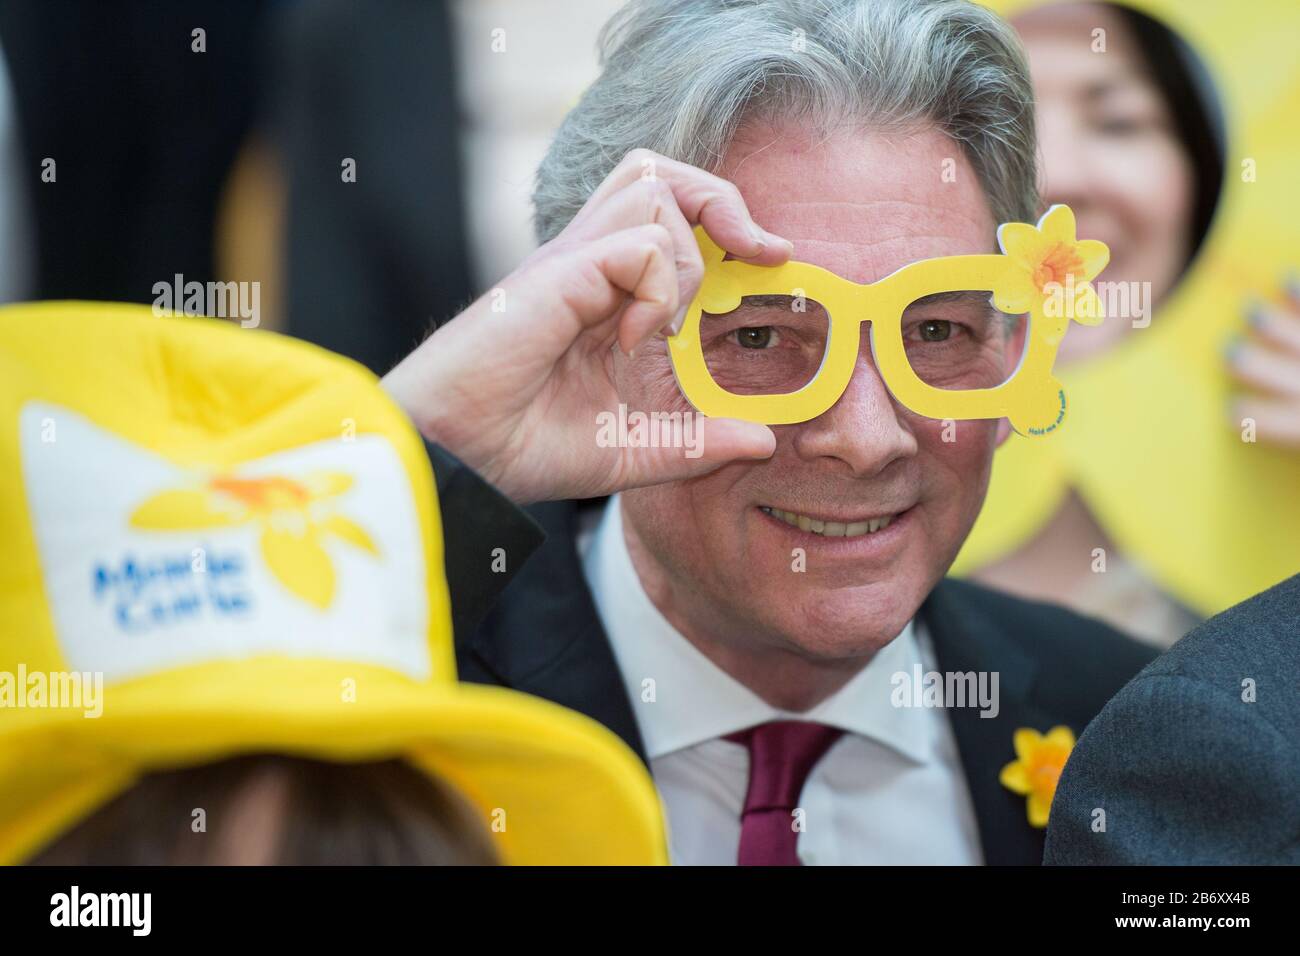 Edinburgh, UK. 12th Mar, 2020. Pictured: Richard Leonard MSP - Leader of the Scottish Labour Party. Photo call for Marie Curie Photo call for Marie Curie charity, in the Scottish Parliament. Credit: Colin Fisher/Alamy Live News Stock Photo